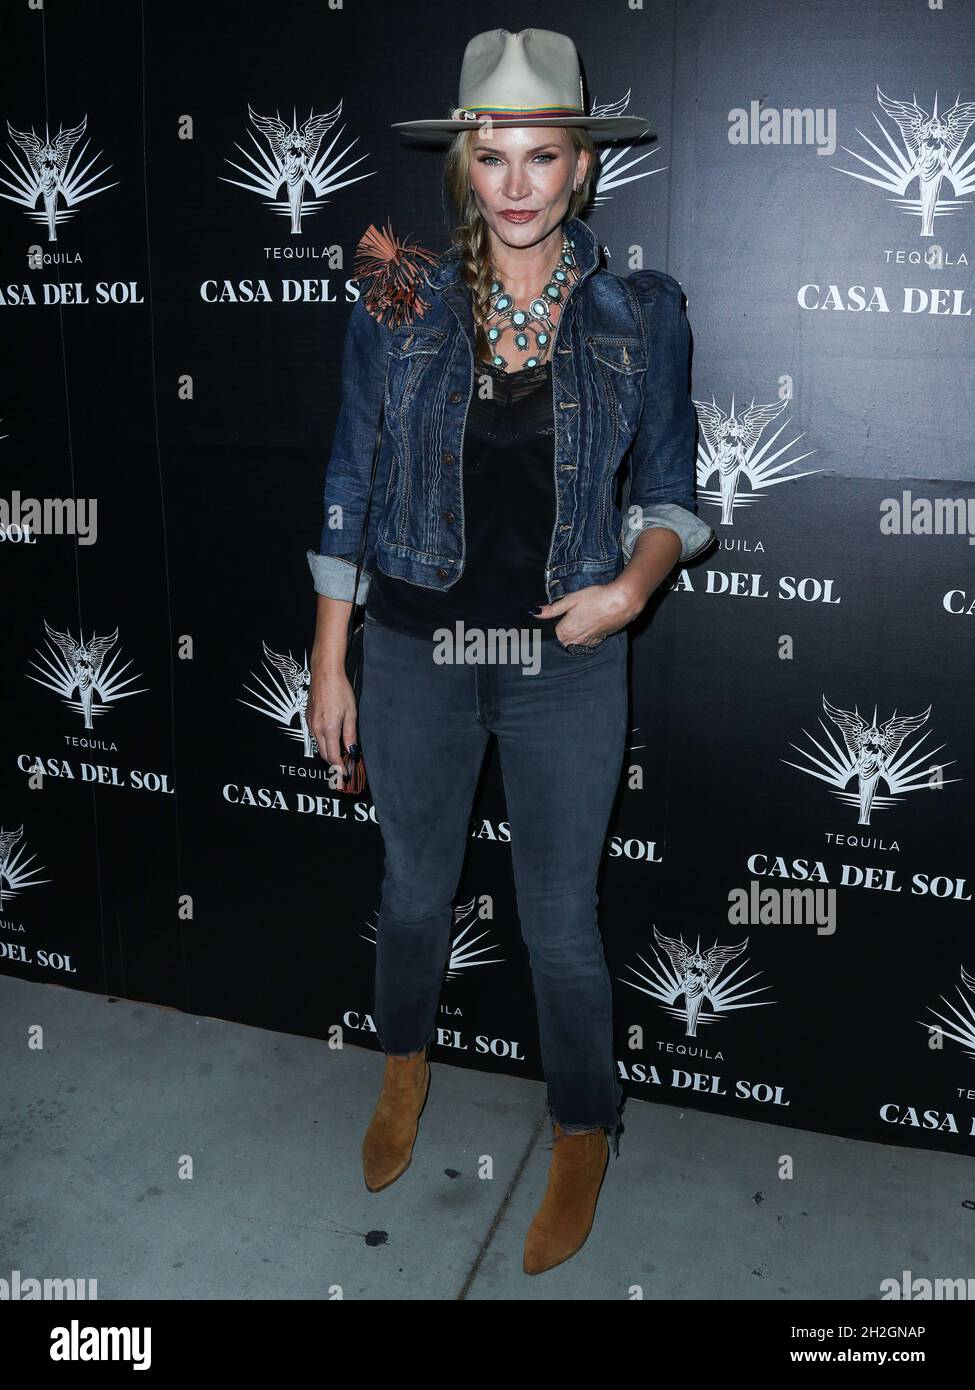 Los Angeles, United States. 21st Oct, 2021. LOS ANGELES, CALIFORNIA, USA - OCTOBER 21: Actress Natasha Henstridge arrives at Brian Bowen Smith's Drivebys Book Launch And Gallery Viewing Presented By Casa Del Sol Tequila held at 8175 Melrose Ave on October 21, 2021 in Los Angeles, California, United States. (Photo by Xavier Collin/Image Press Agency) Credit: Image Press Agency/Alamy Live News Stock Photo